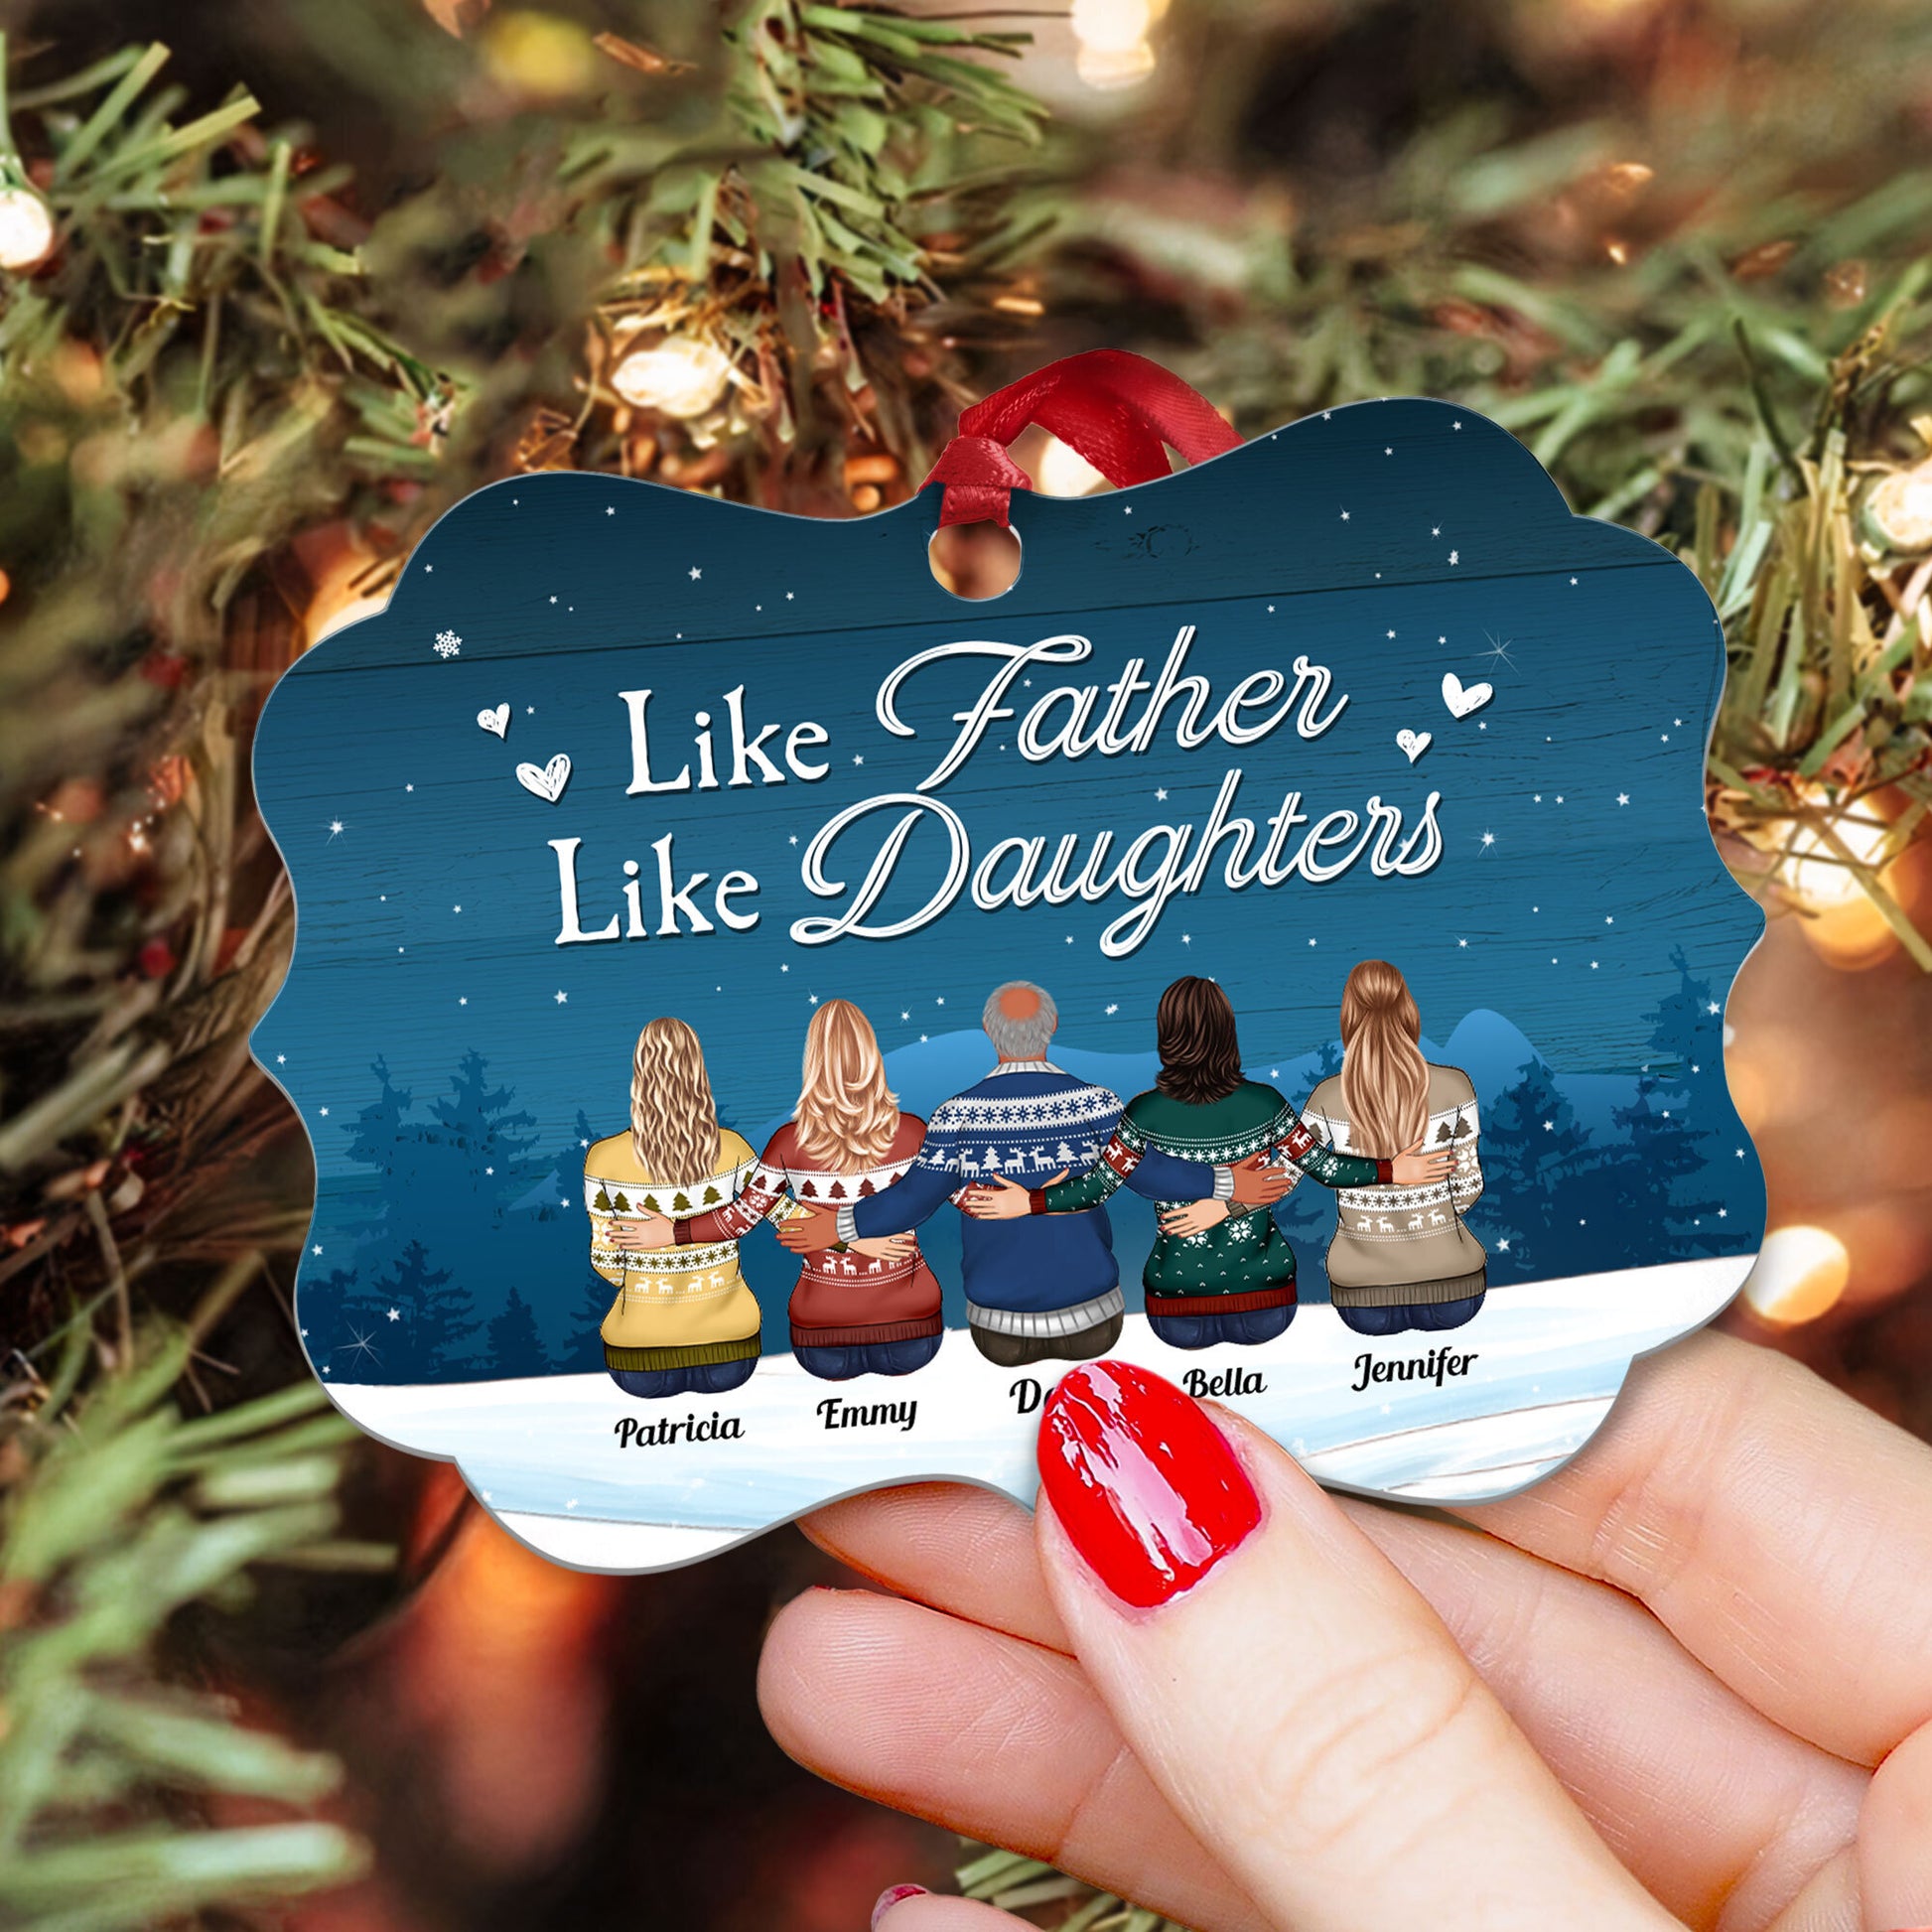 Like Father Like Daughters, Sons - Personalized Aluminum Ornament - Christmas Gift For Father, Dad, Papa - Family Hugging